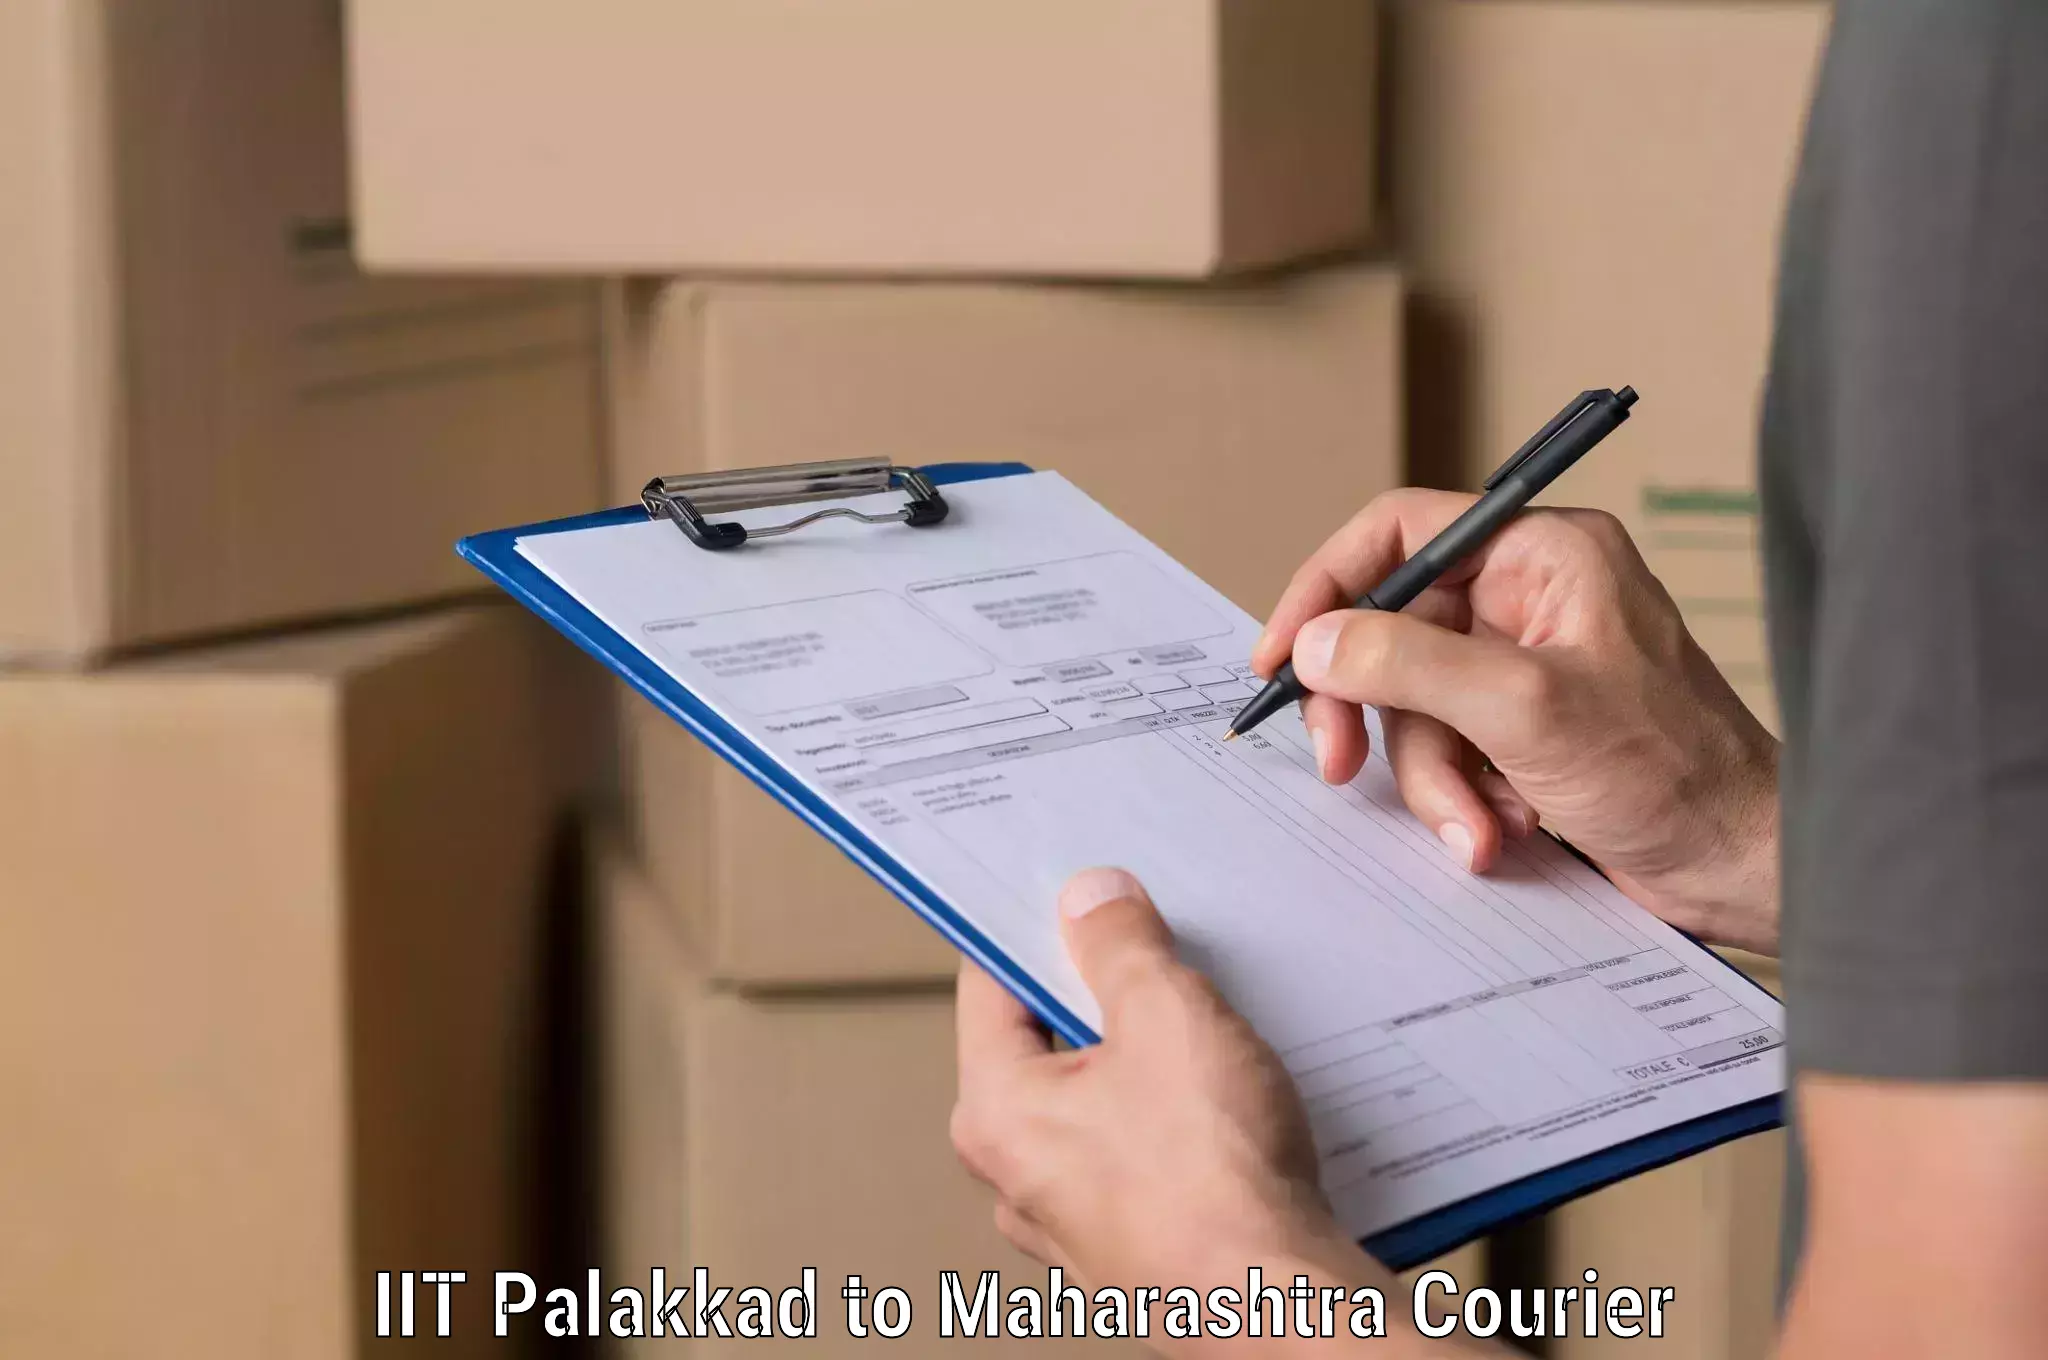 Reliable courier service IIT Palakkad to Akluj